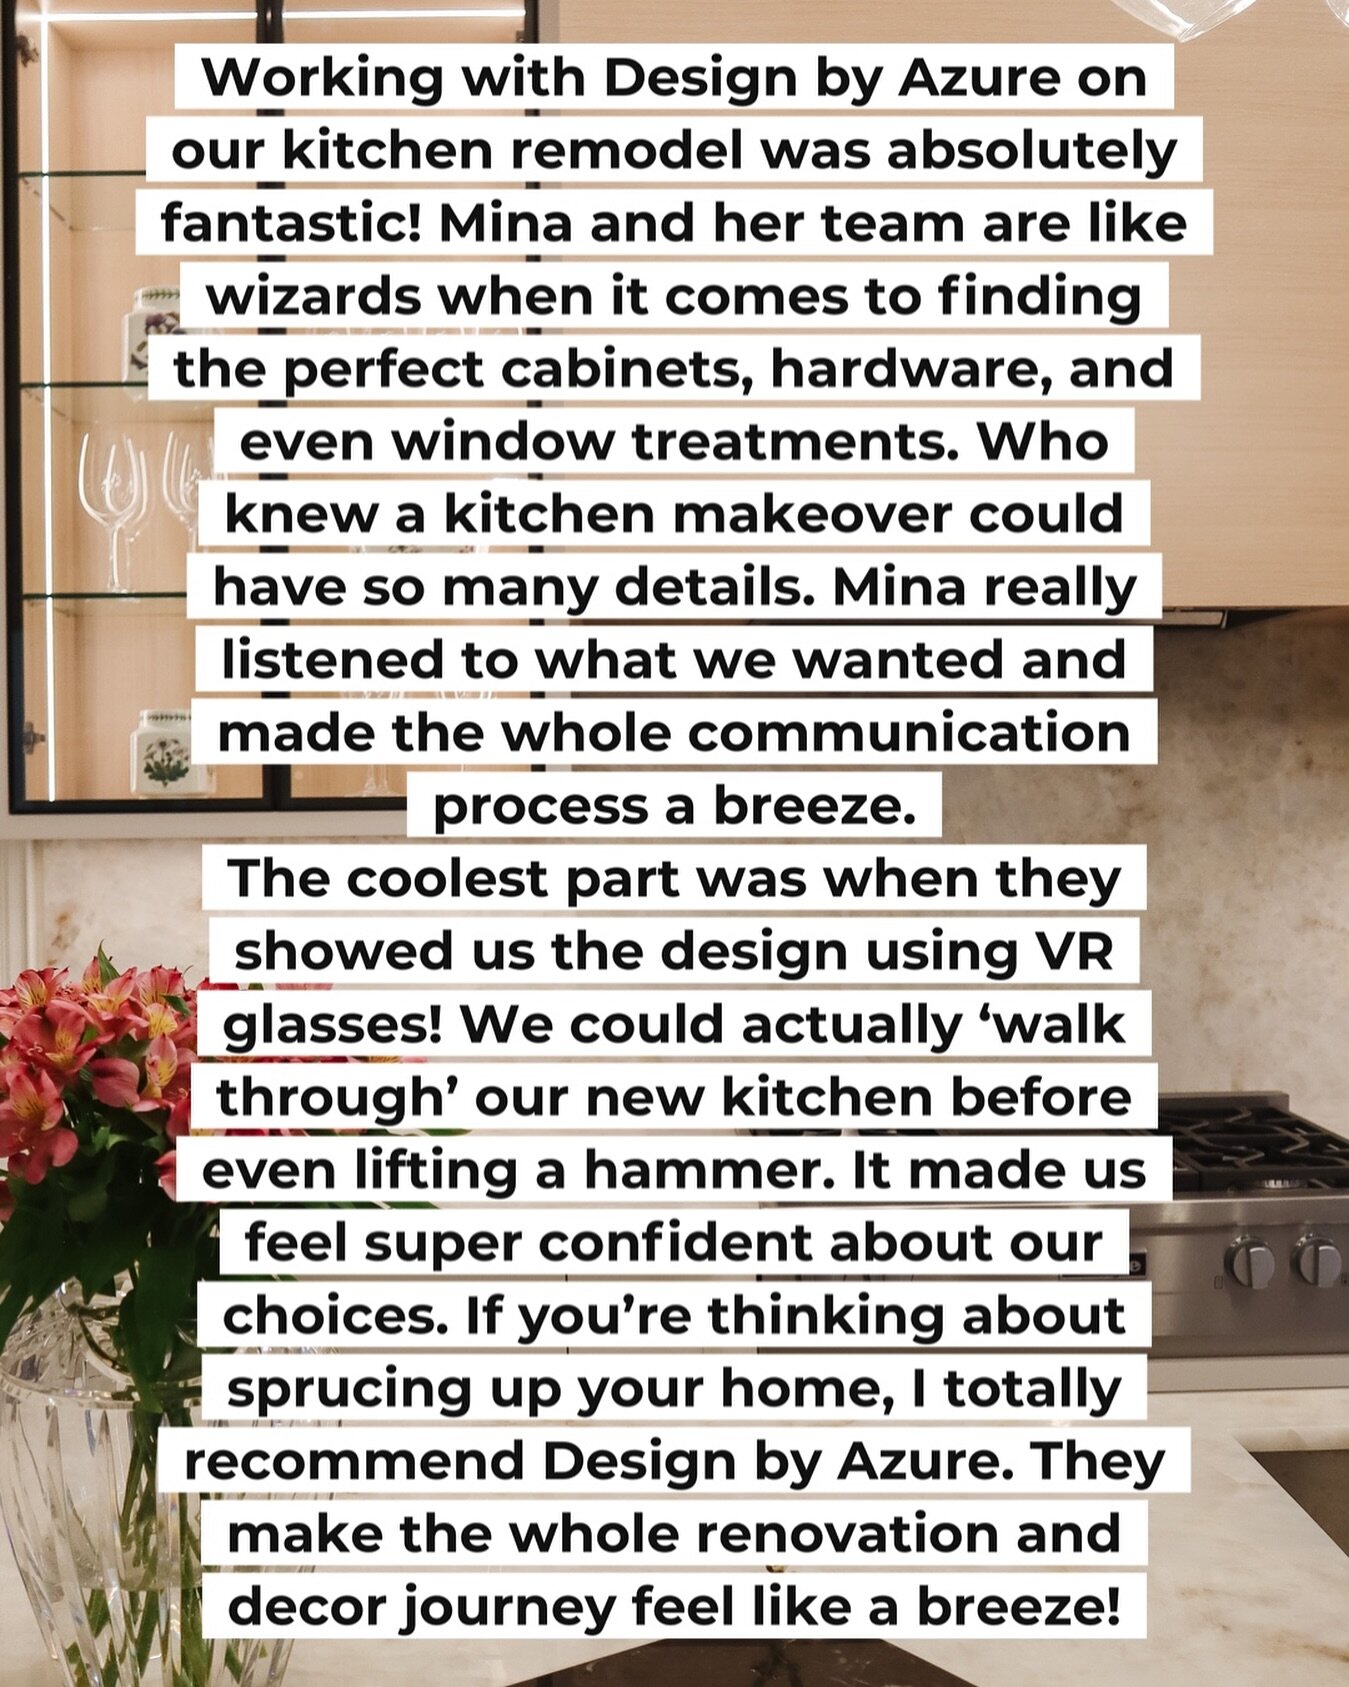 &ldquo;Transformed our kitchen dreams into reality with Design by Azure! Mina and her team are design wizards who made every detail seamless. From cabinets to VR glasses walkthroughs, our home makeover was a breeze. Highly recommend for an stress-fre